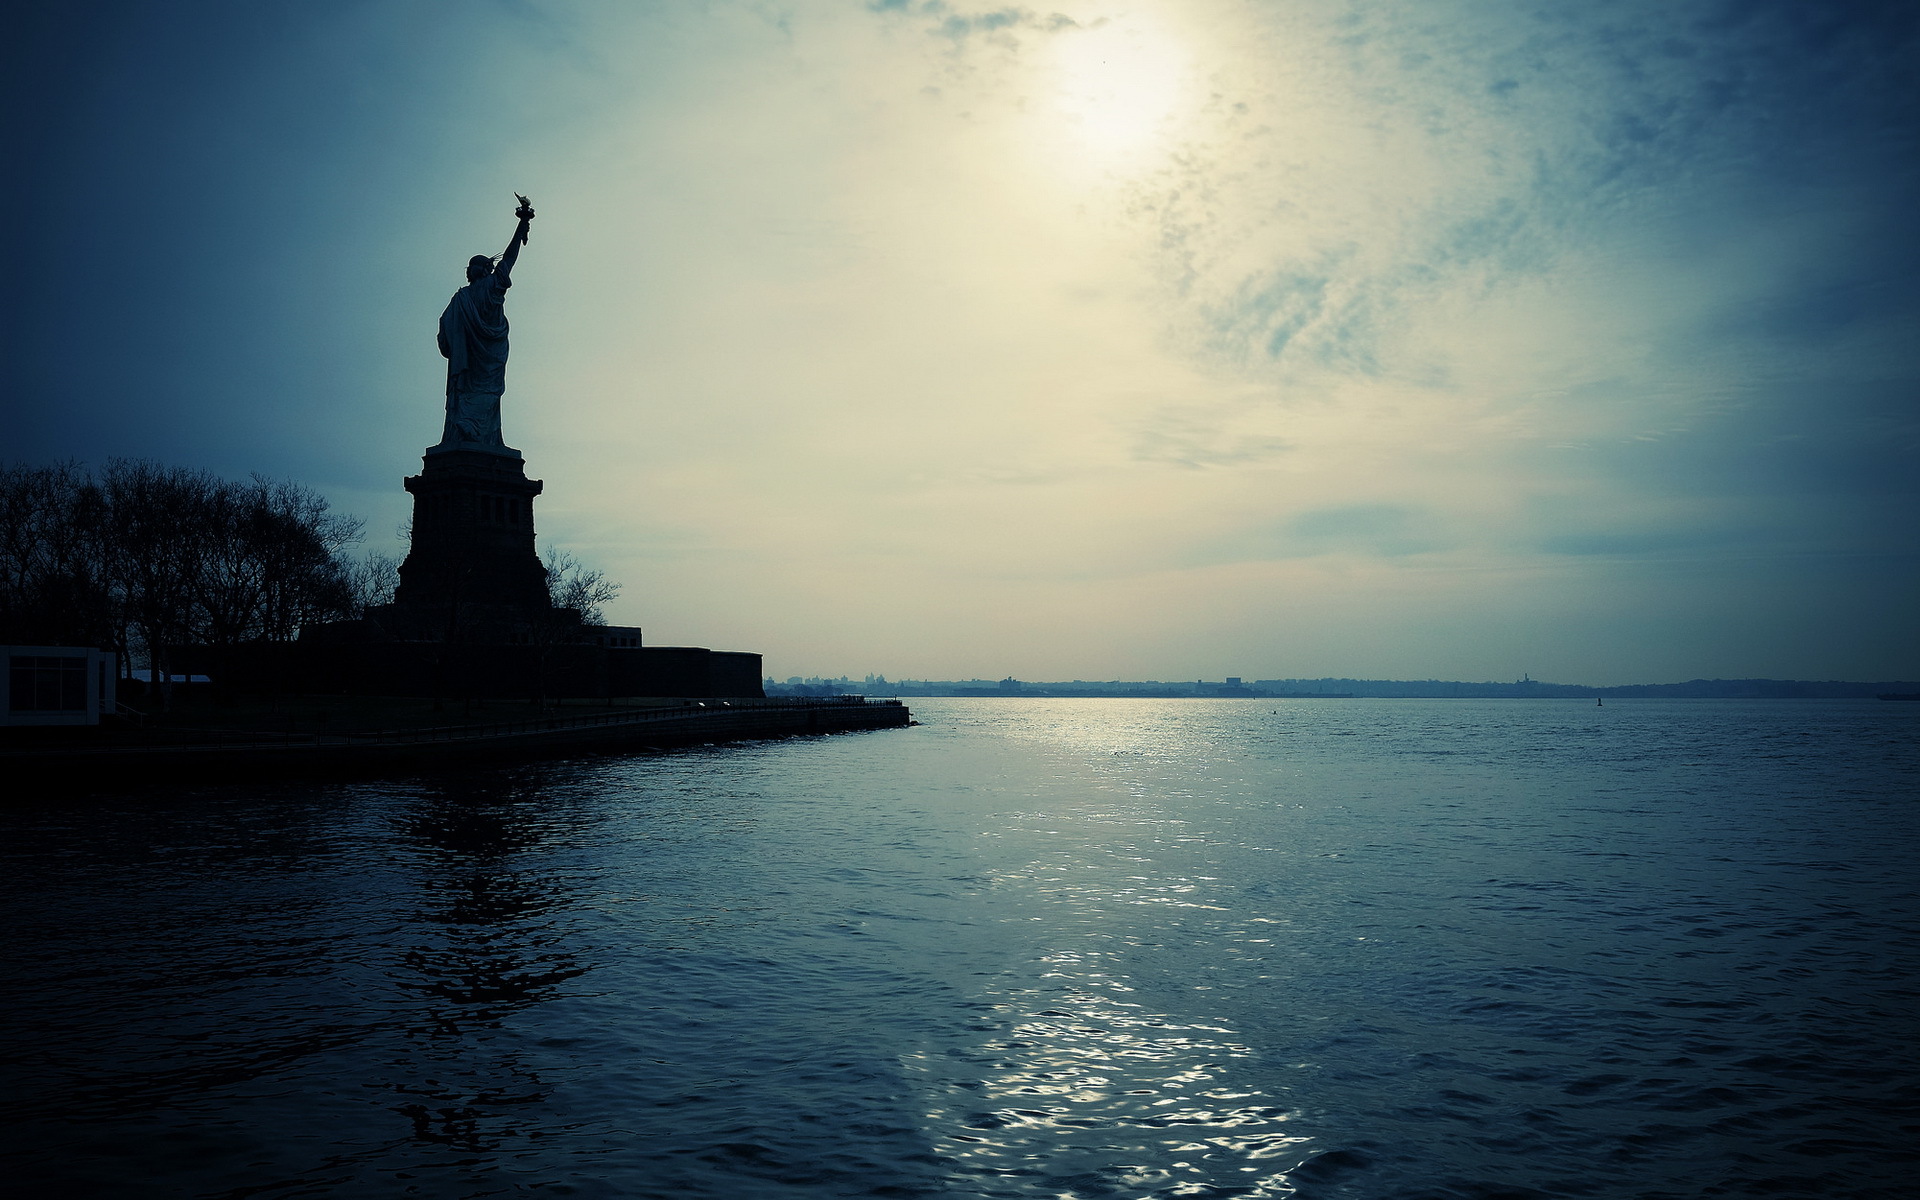 Download mobile wallpaper Statue Of Liberty, Man Made for free.